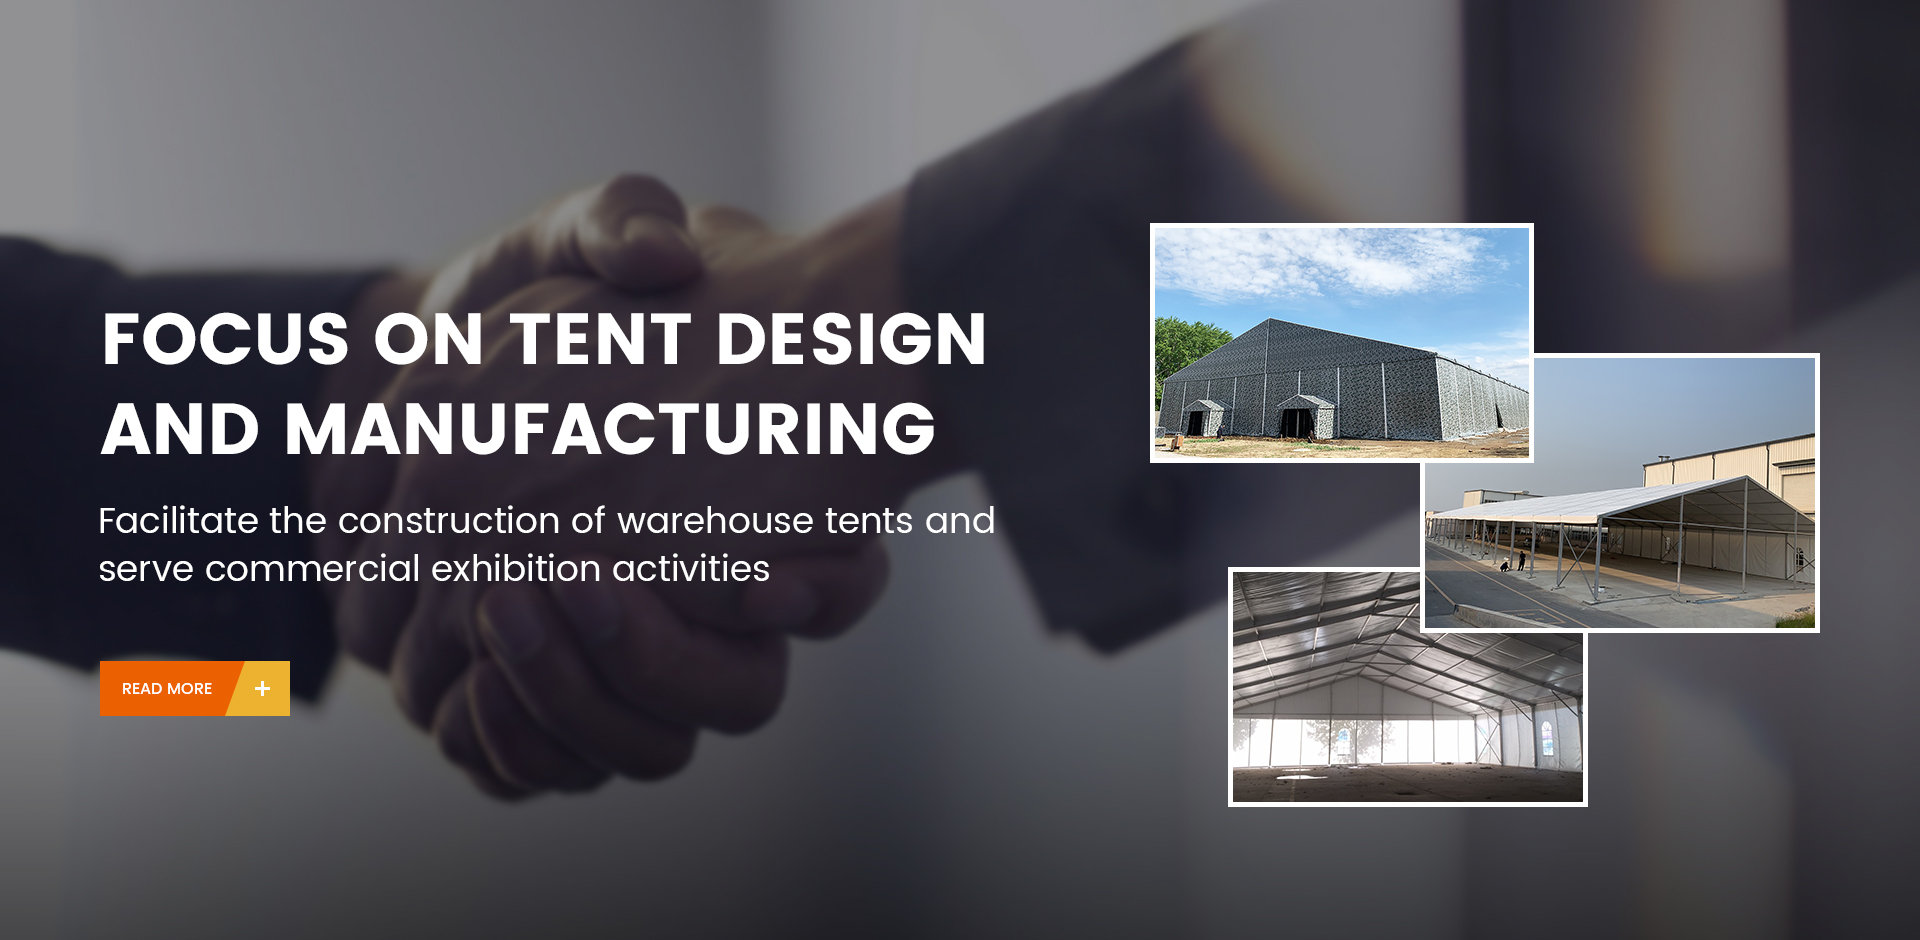 Tent design and manufacturing